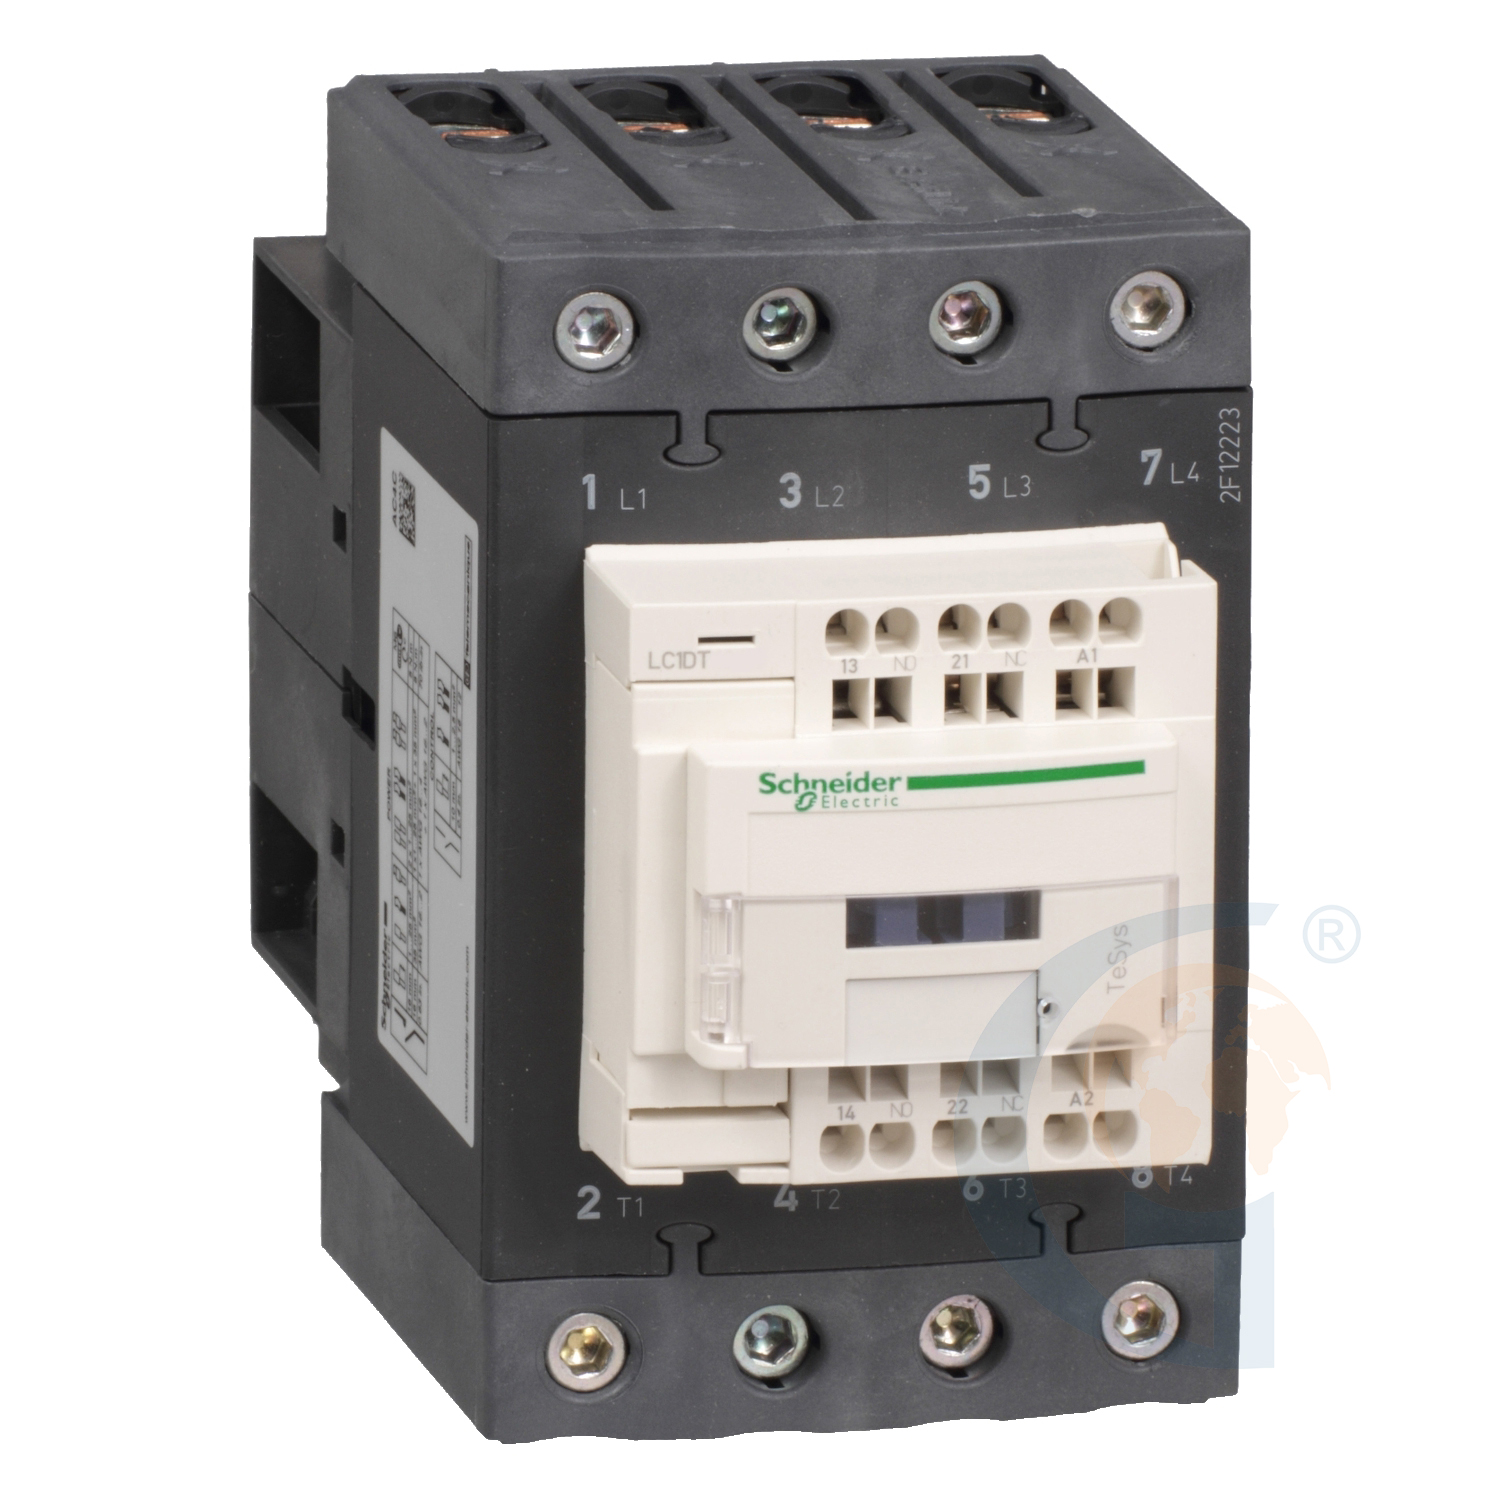 Schneider Electric LC1DT60A3ED TeSys D contactor – 4P(4 NO) – AC-1 – <= 440 V 60 A - 48 V DC standard coil https://gesrepair.com/wp-content/uploads/2020/Schneider/Schneider_Electric_LC1DT60A3ED_.jpg